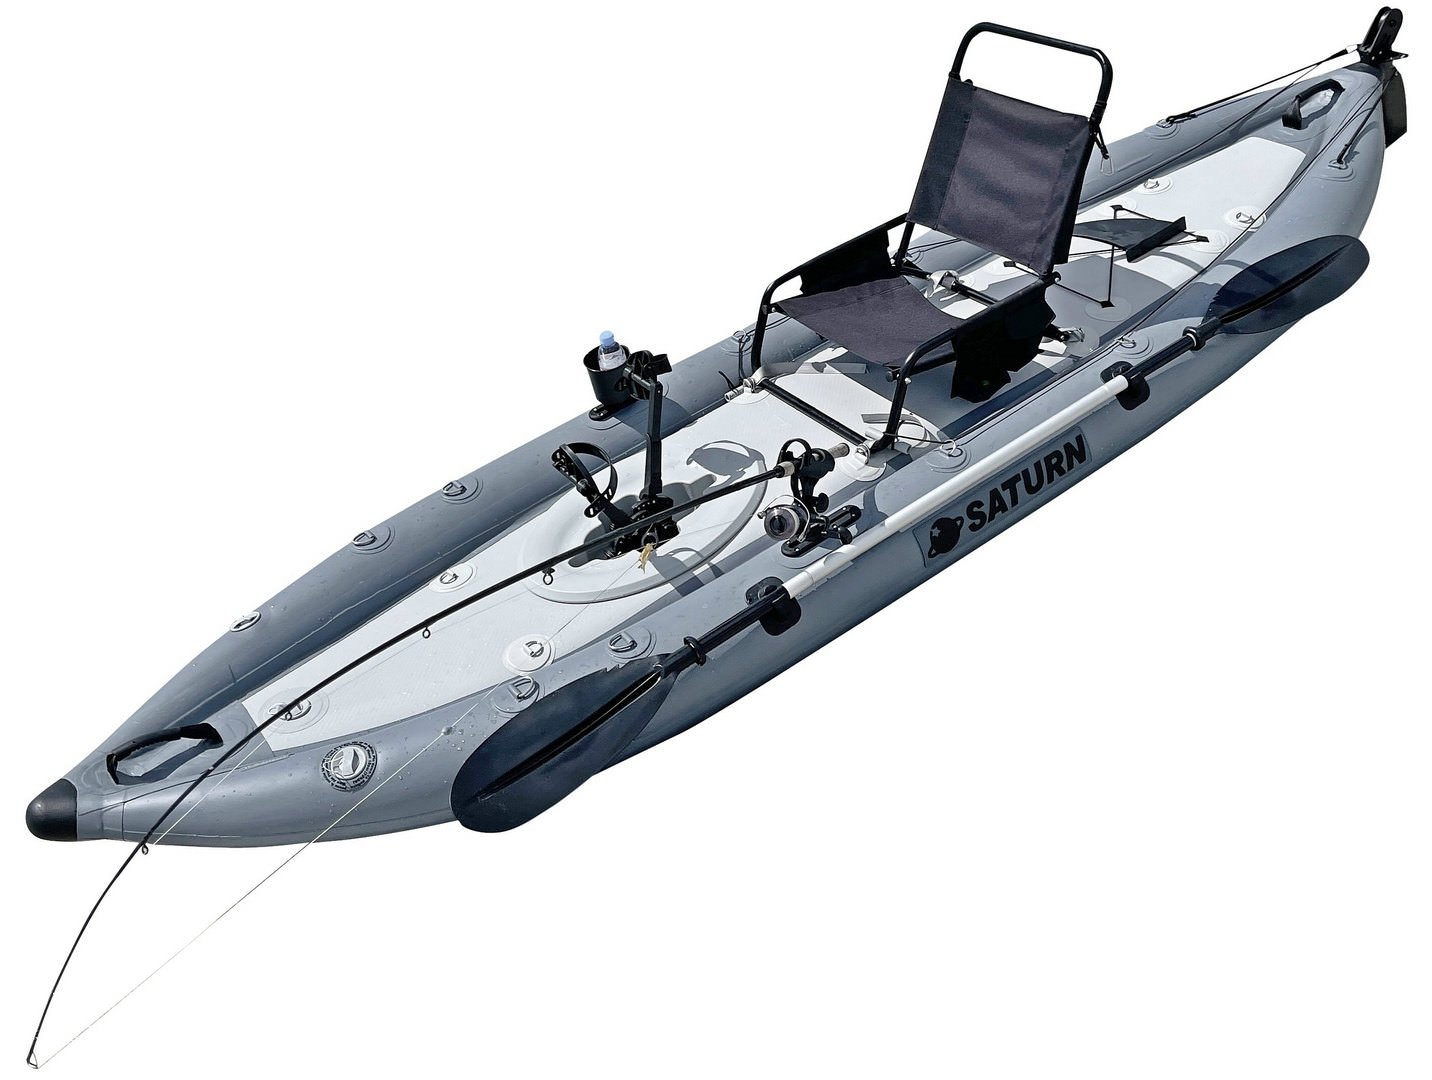 12' Inflatable Fin Pedal Kayak by Saturn. Fin Pedal Drive Included. Inflatable Kayaks On Sale.